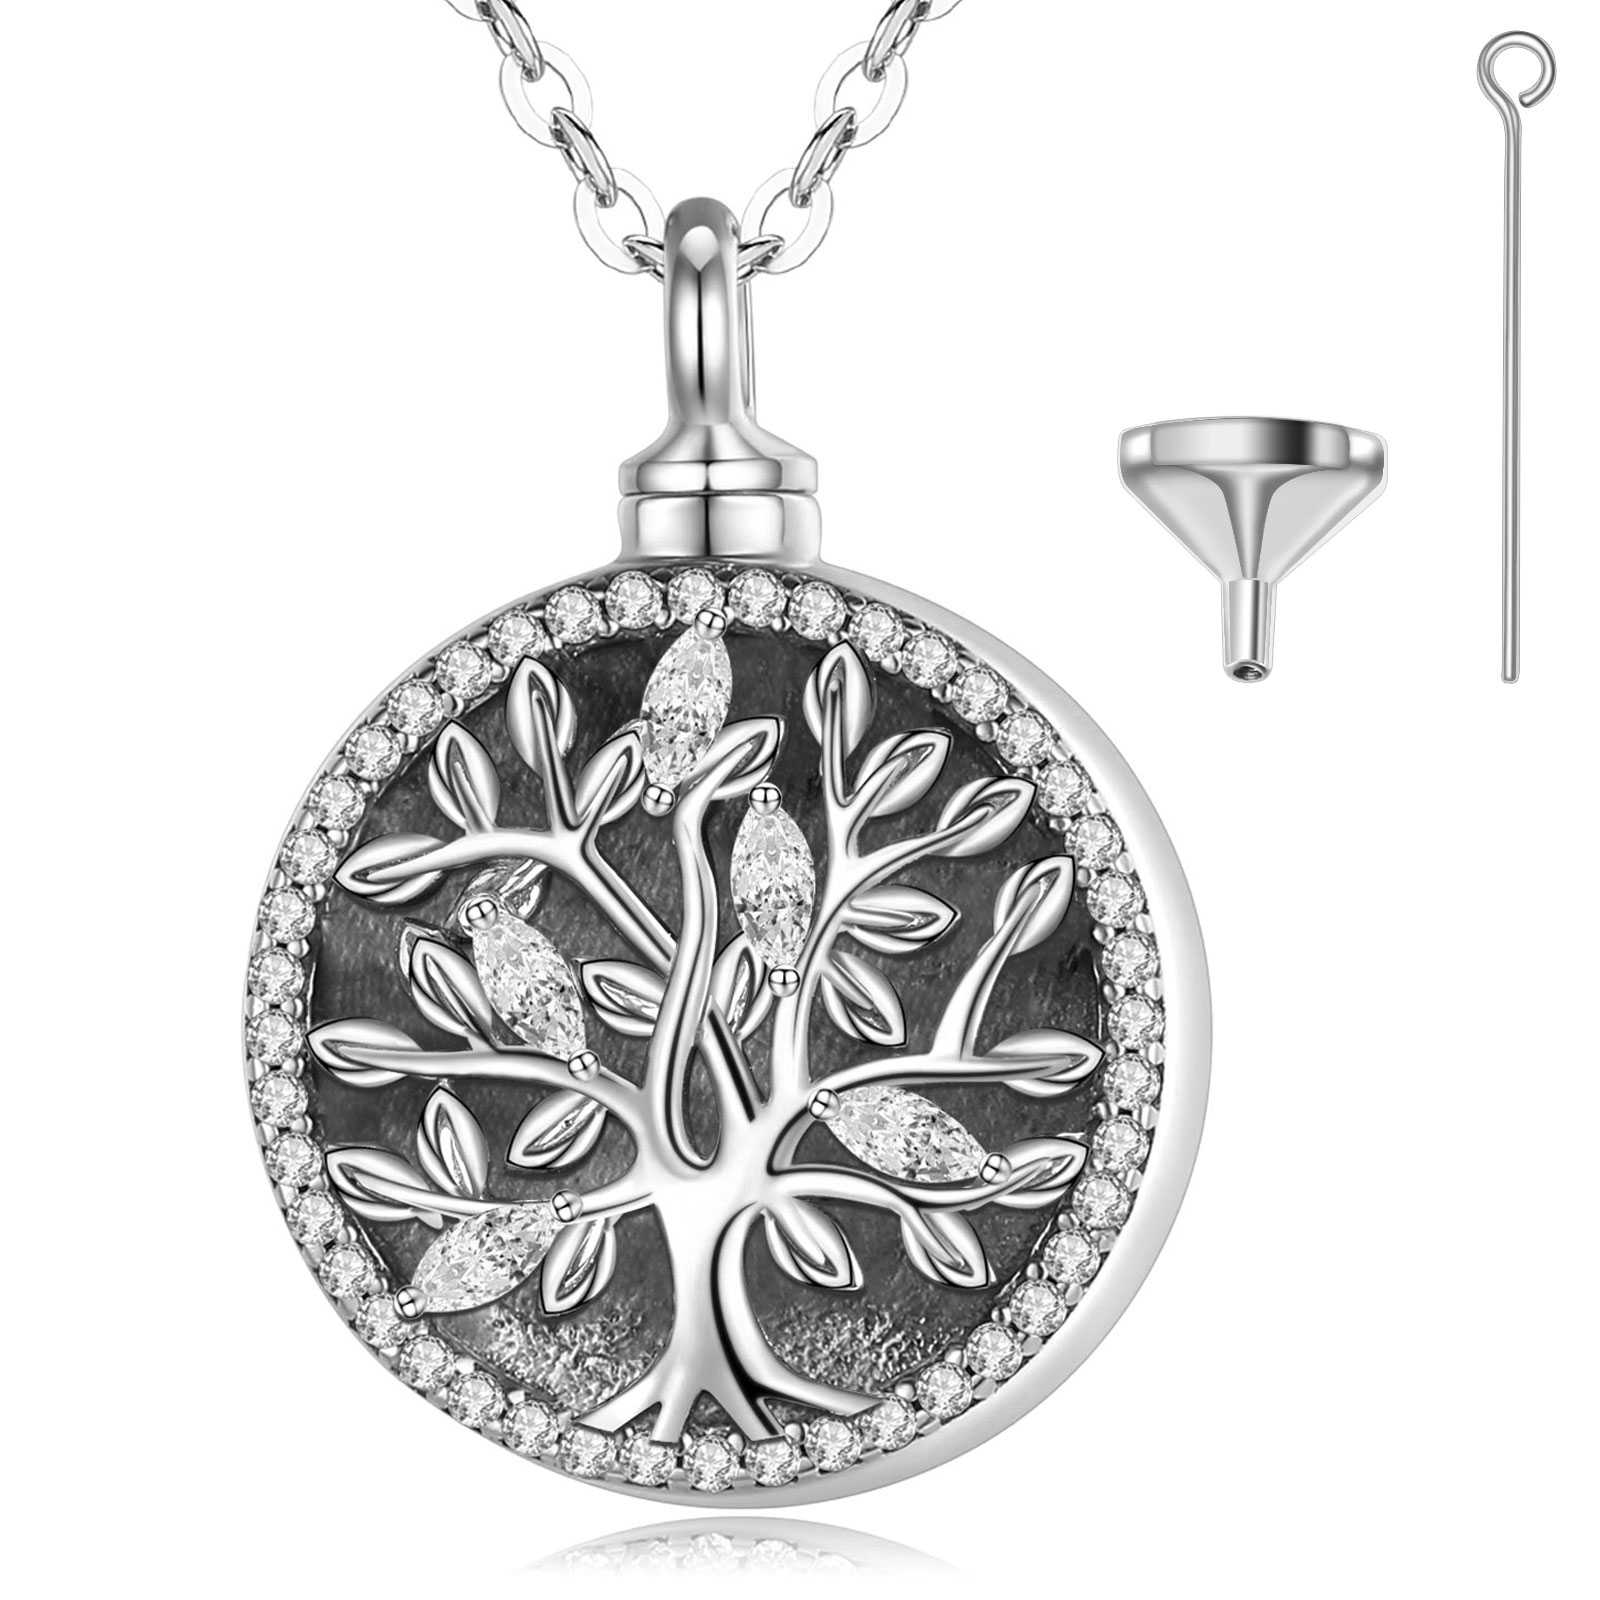 Merryshine Amazon Hot Selling S925 Sterling Silver Tree of Life Pendant Forever in my heart Cremation Ashes Jewelry